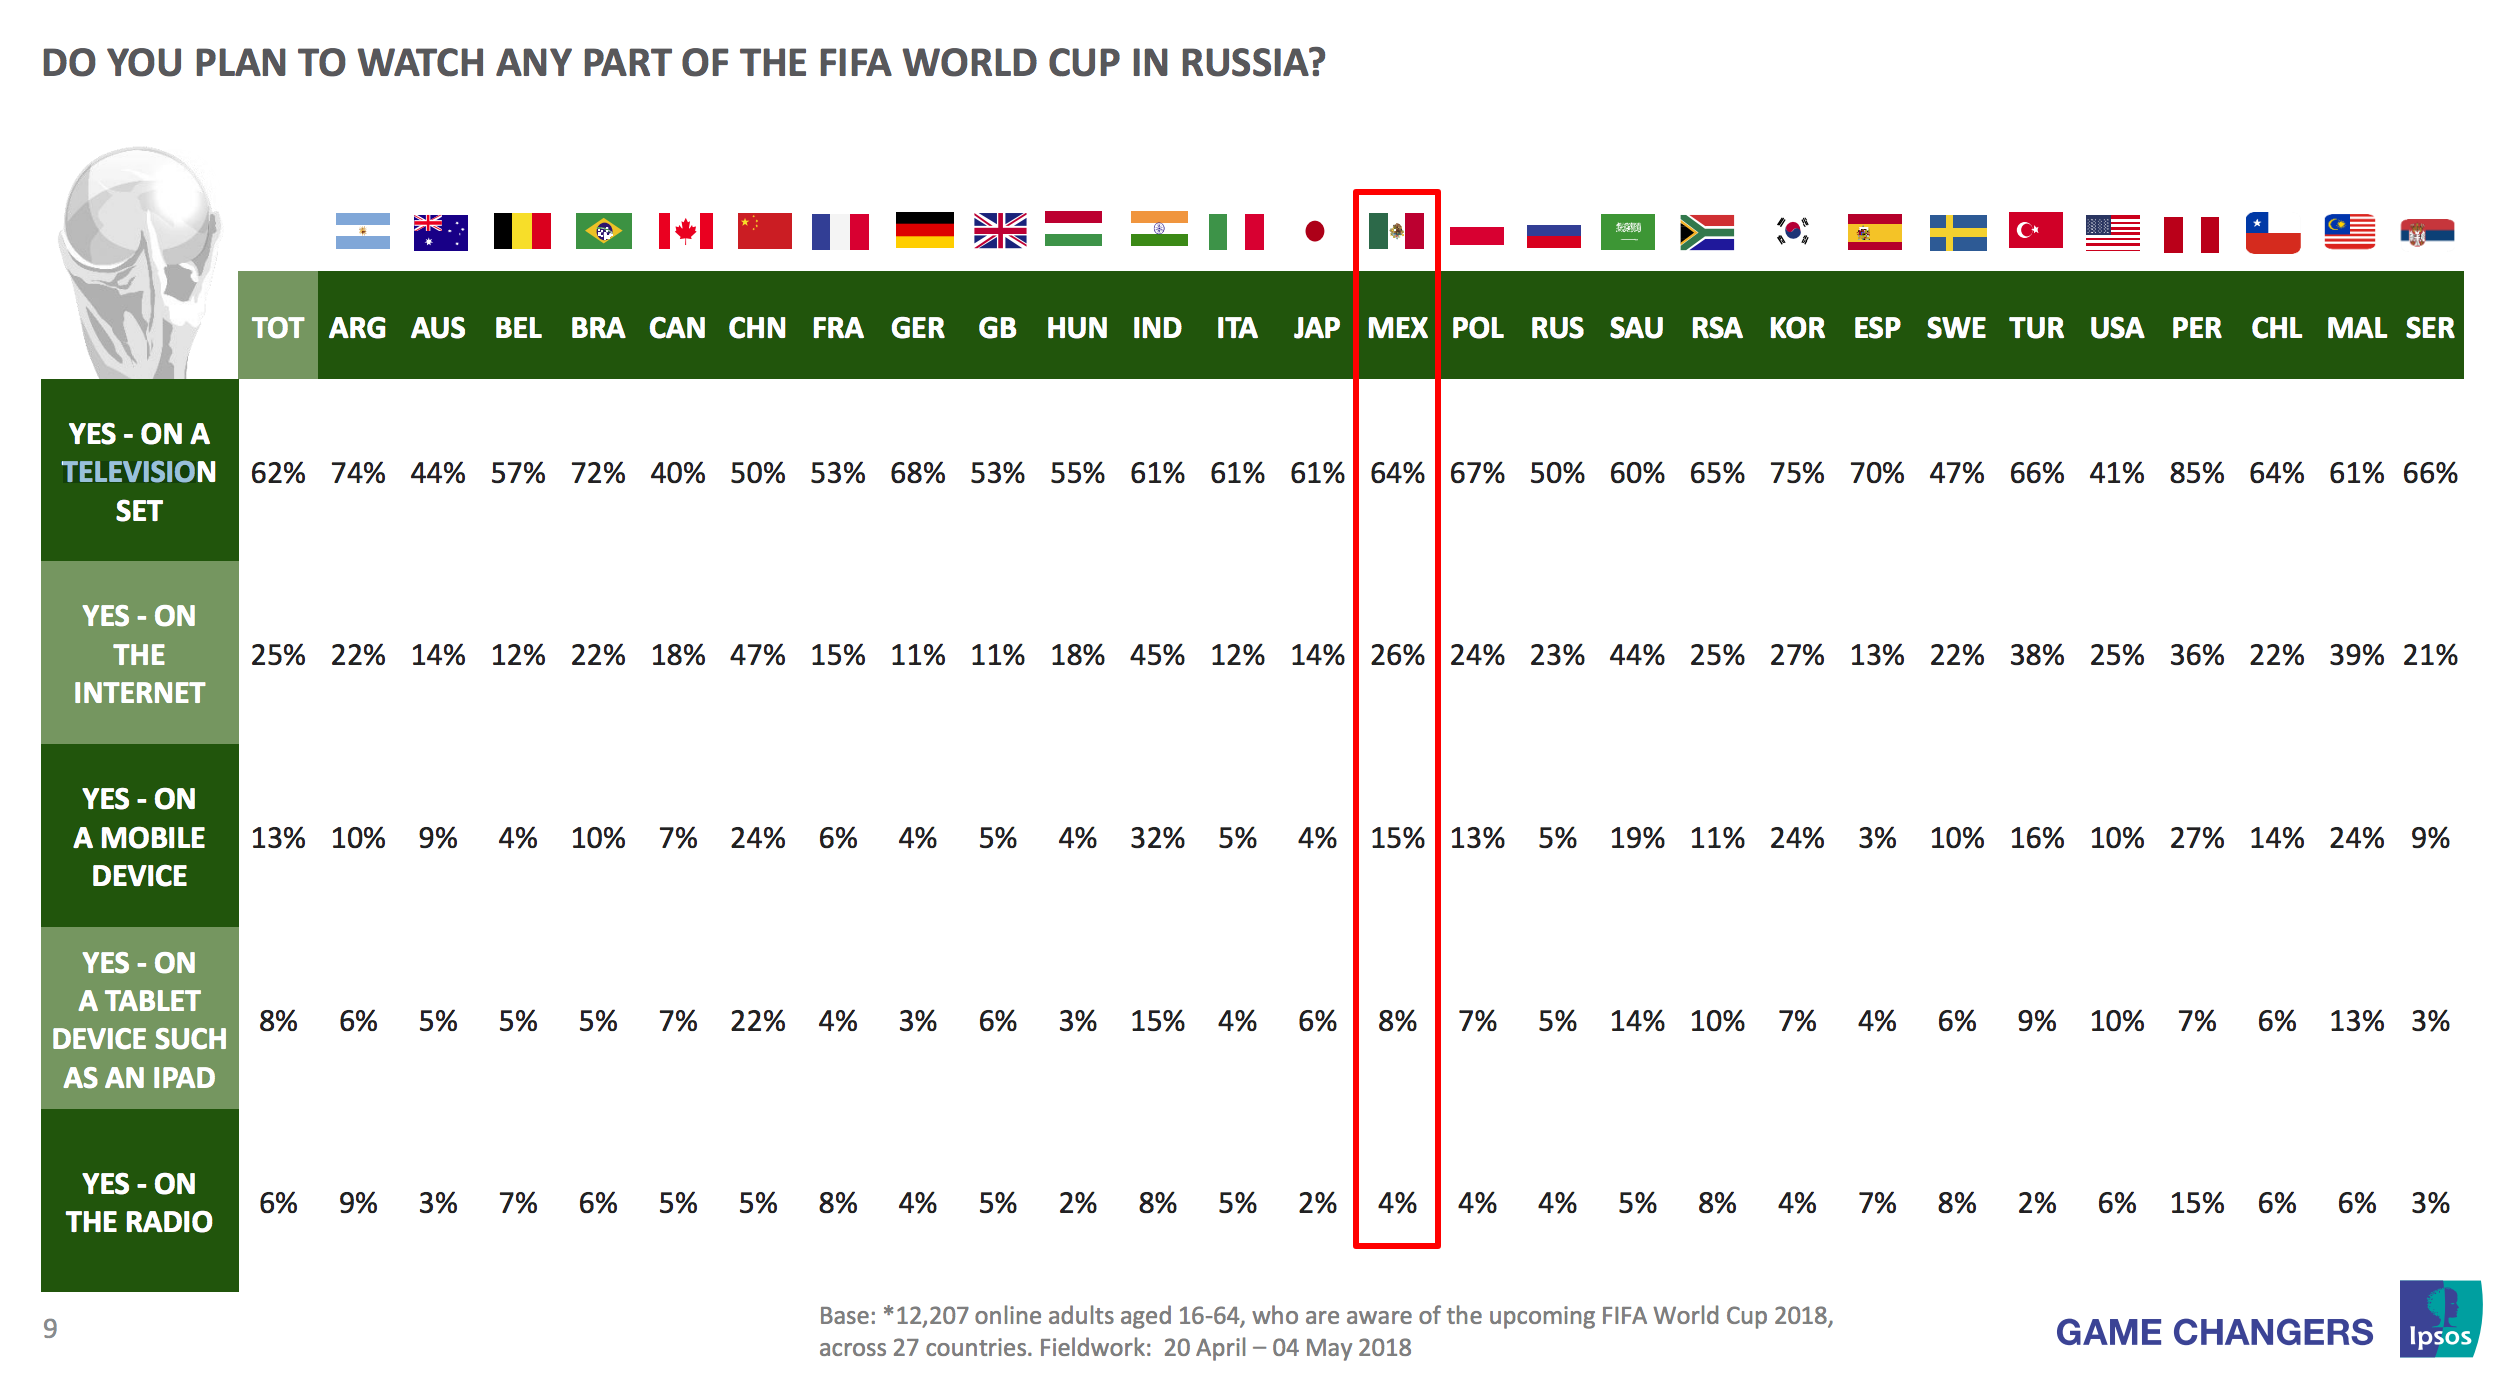 Global Attitudes Towards the FIFA World Cup 2018 in Russia.